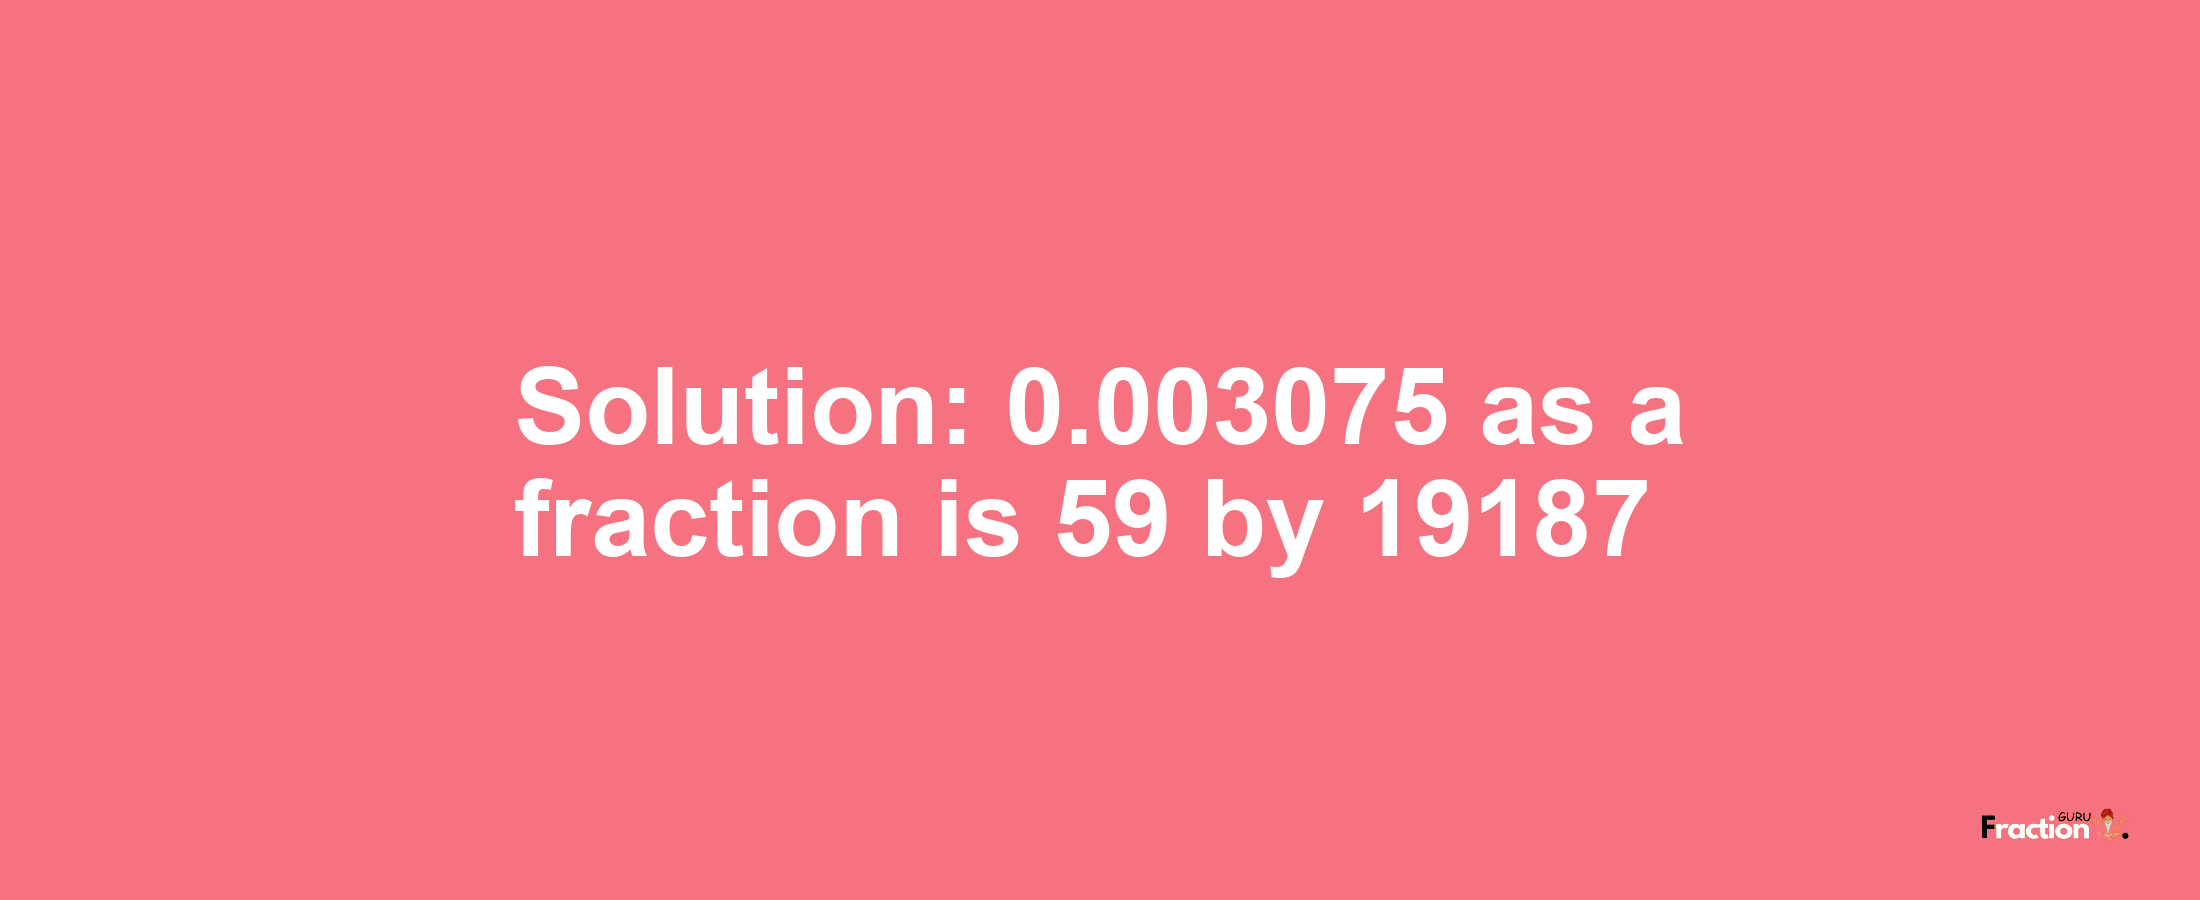 Solution:0.003075 as a fraction is 59/19187